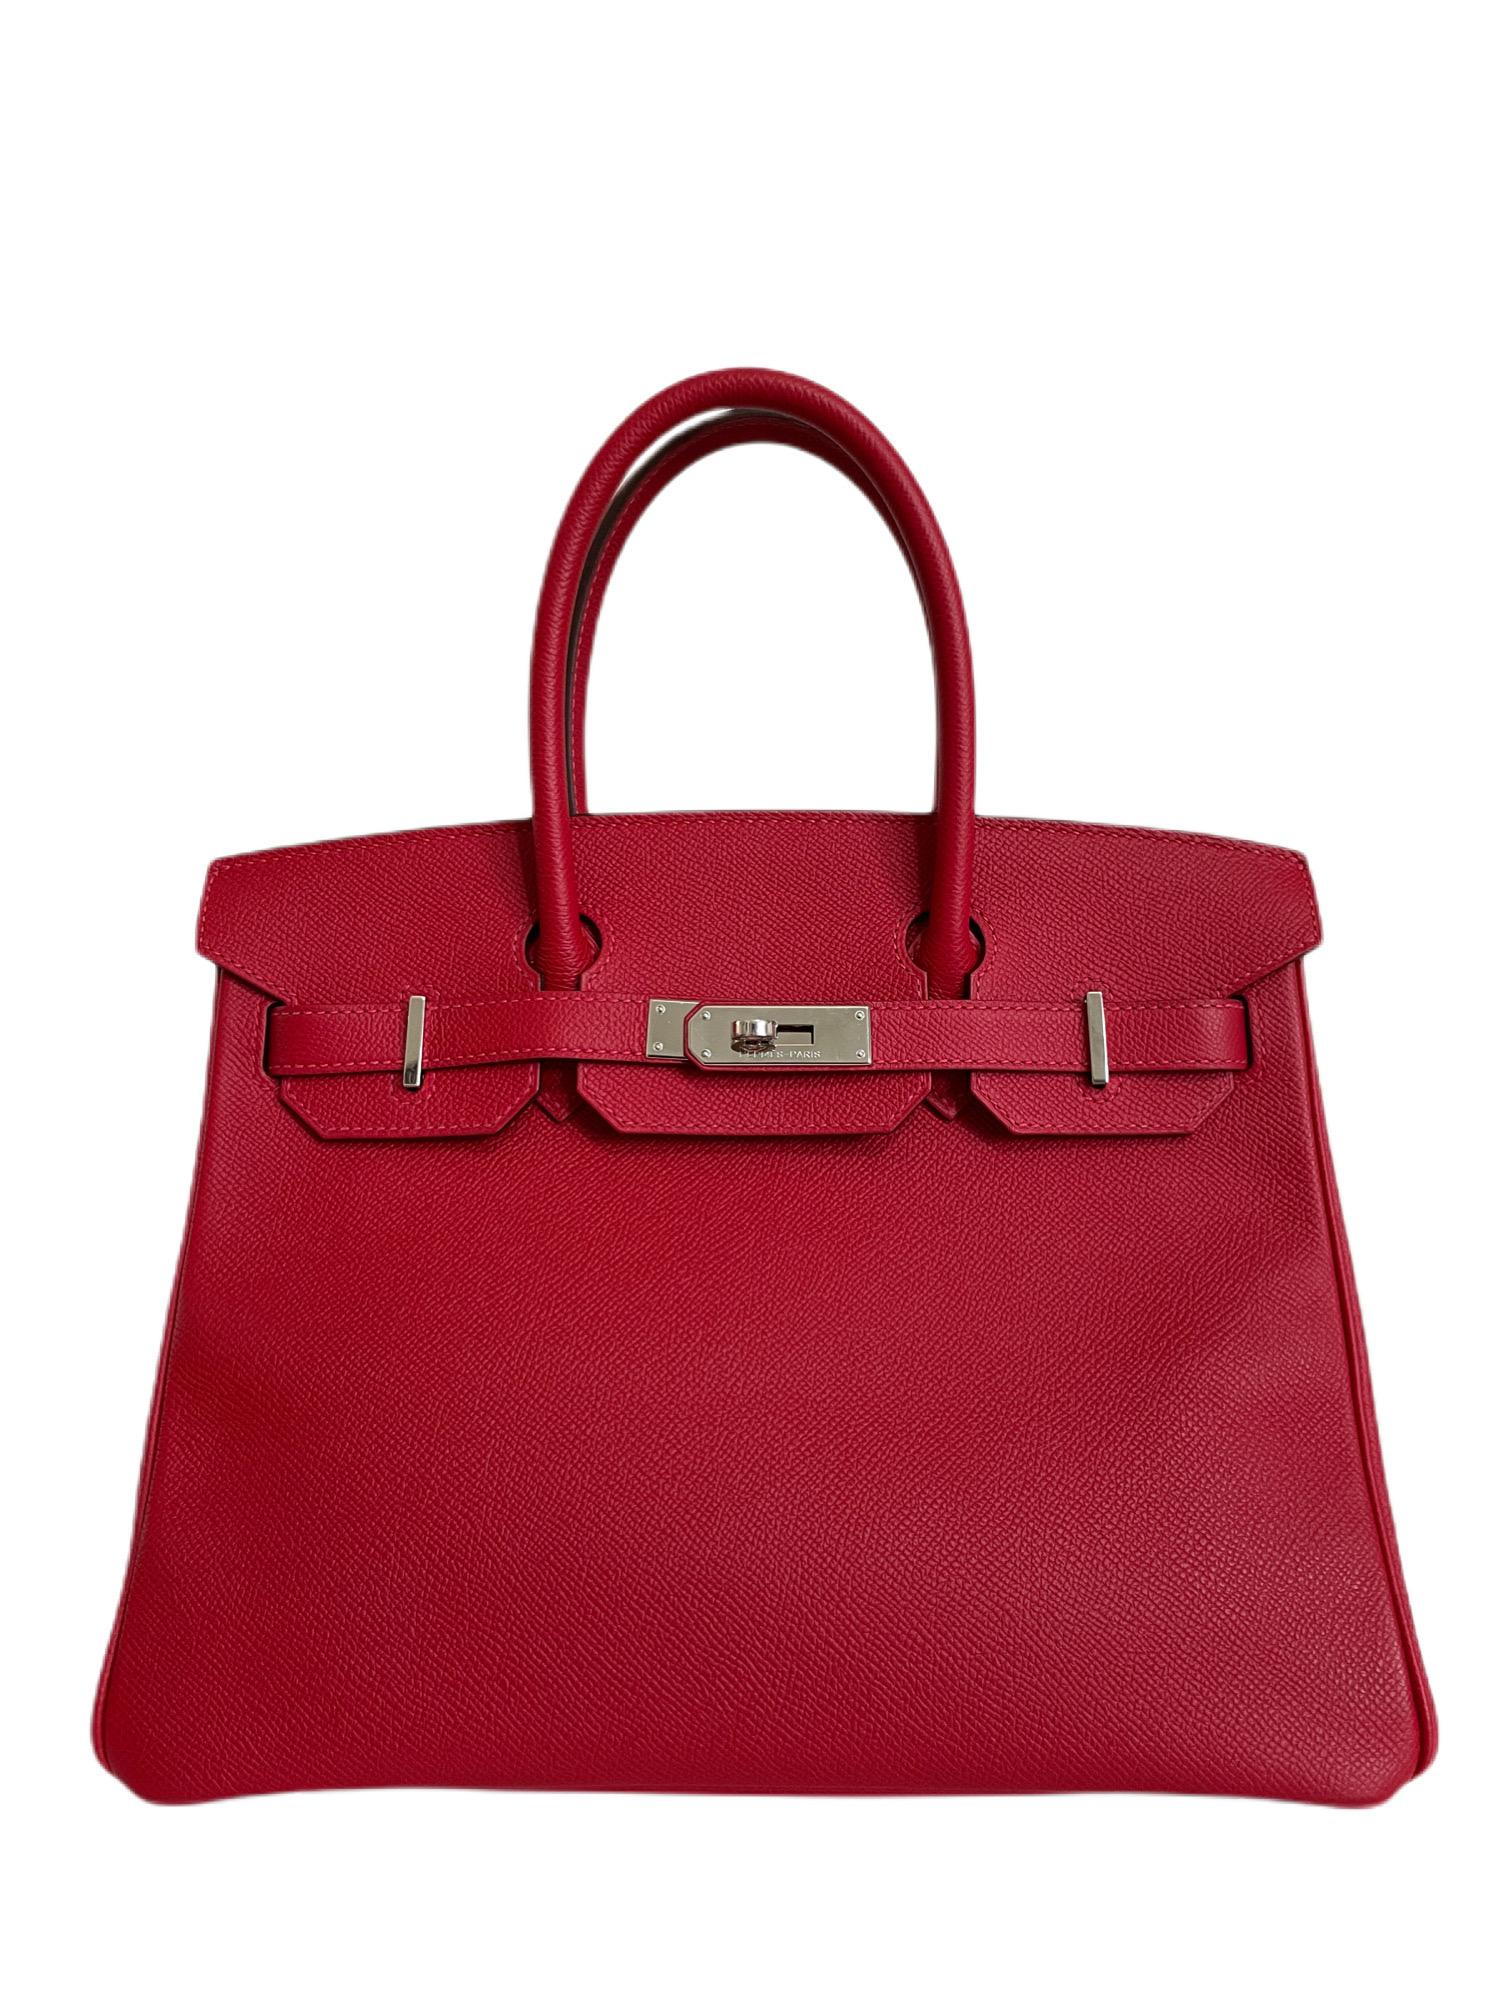 Stunning True Red Hermes Birkin 30 Rouge Casaque Red Epsom Palladium Hardware.  Excellent Condition, Hairlines on Hardware, Excellent corners and Structure. 

Shop with Confidence from Lux Addicts. Authenticity Guaranteed!